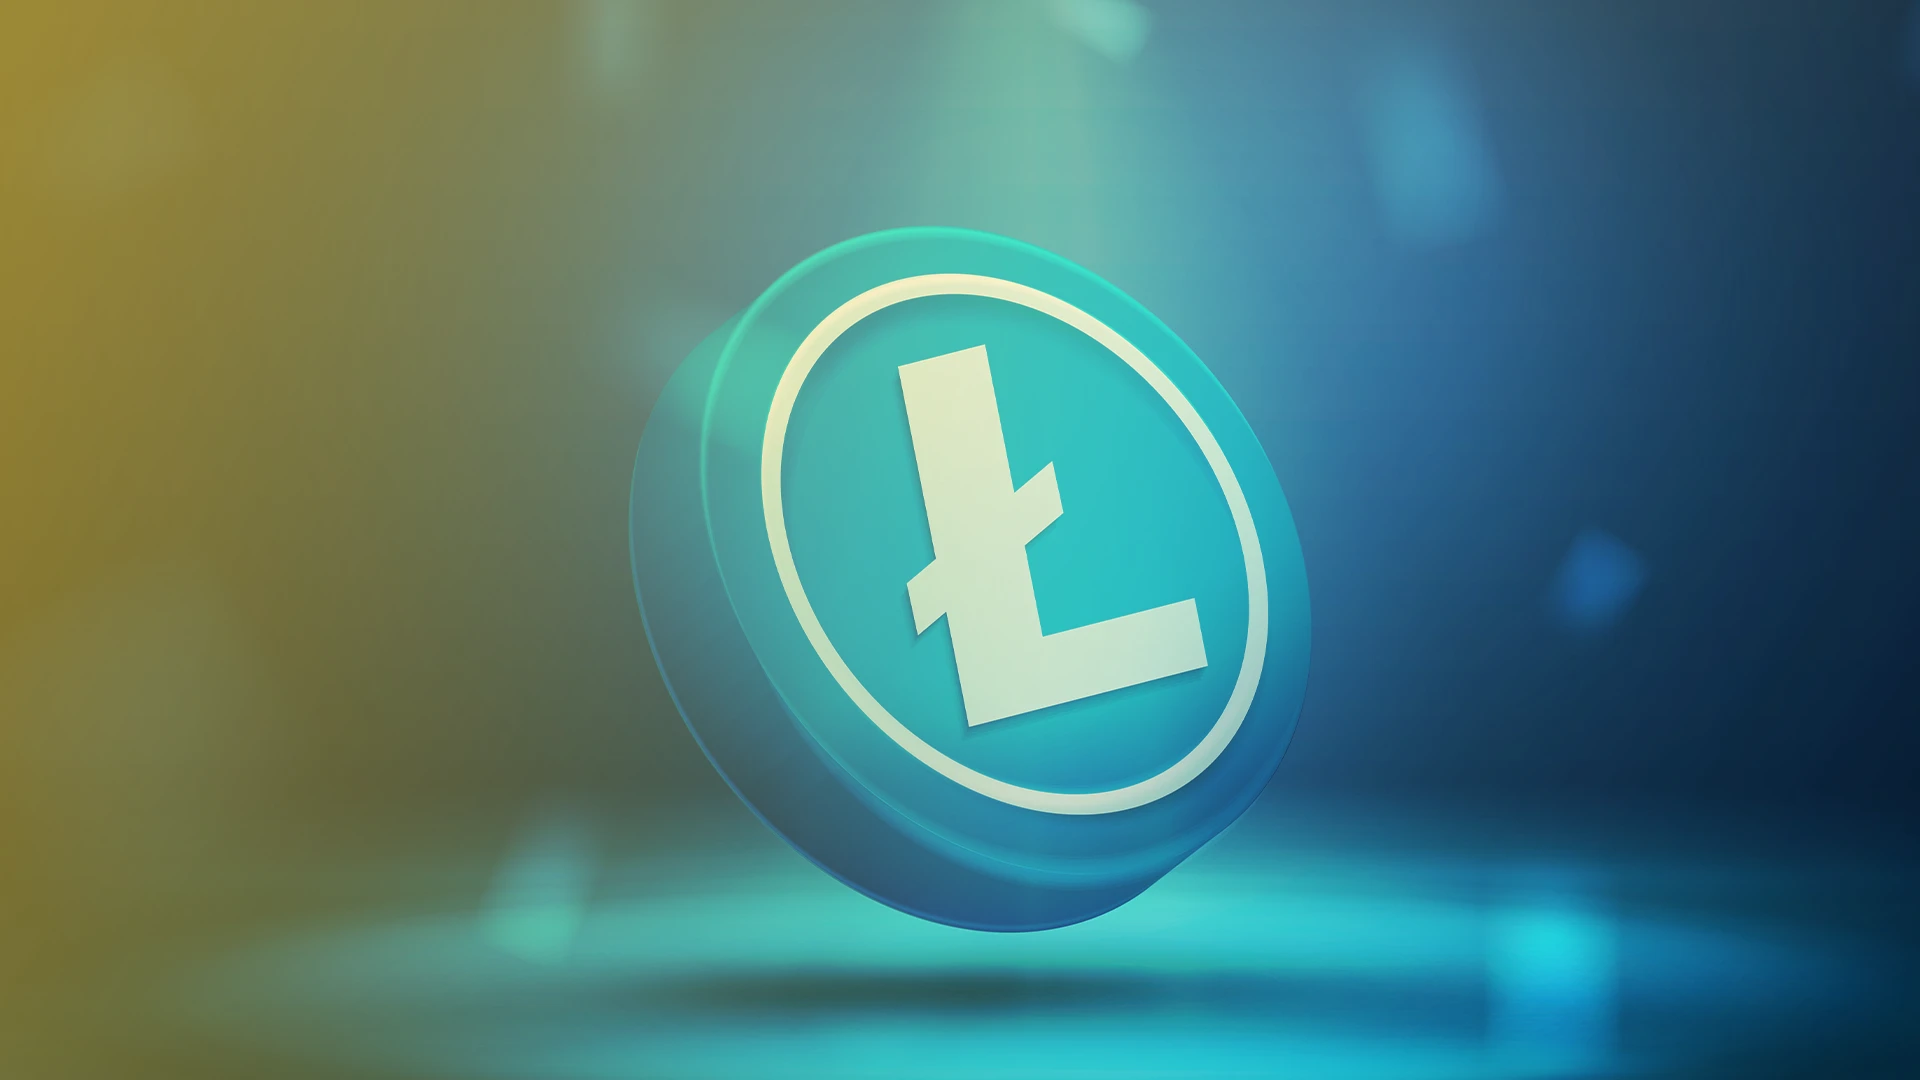 Litecoin Mining: Detailed Guide on How to Mine Litecoin (LTC)